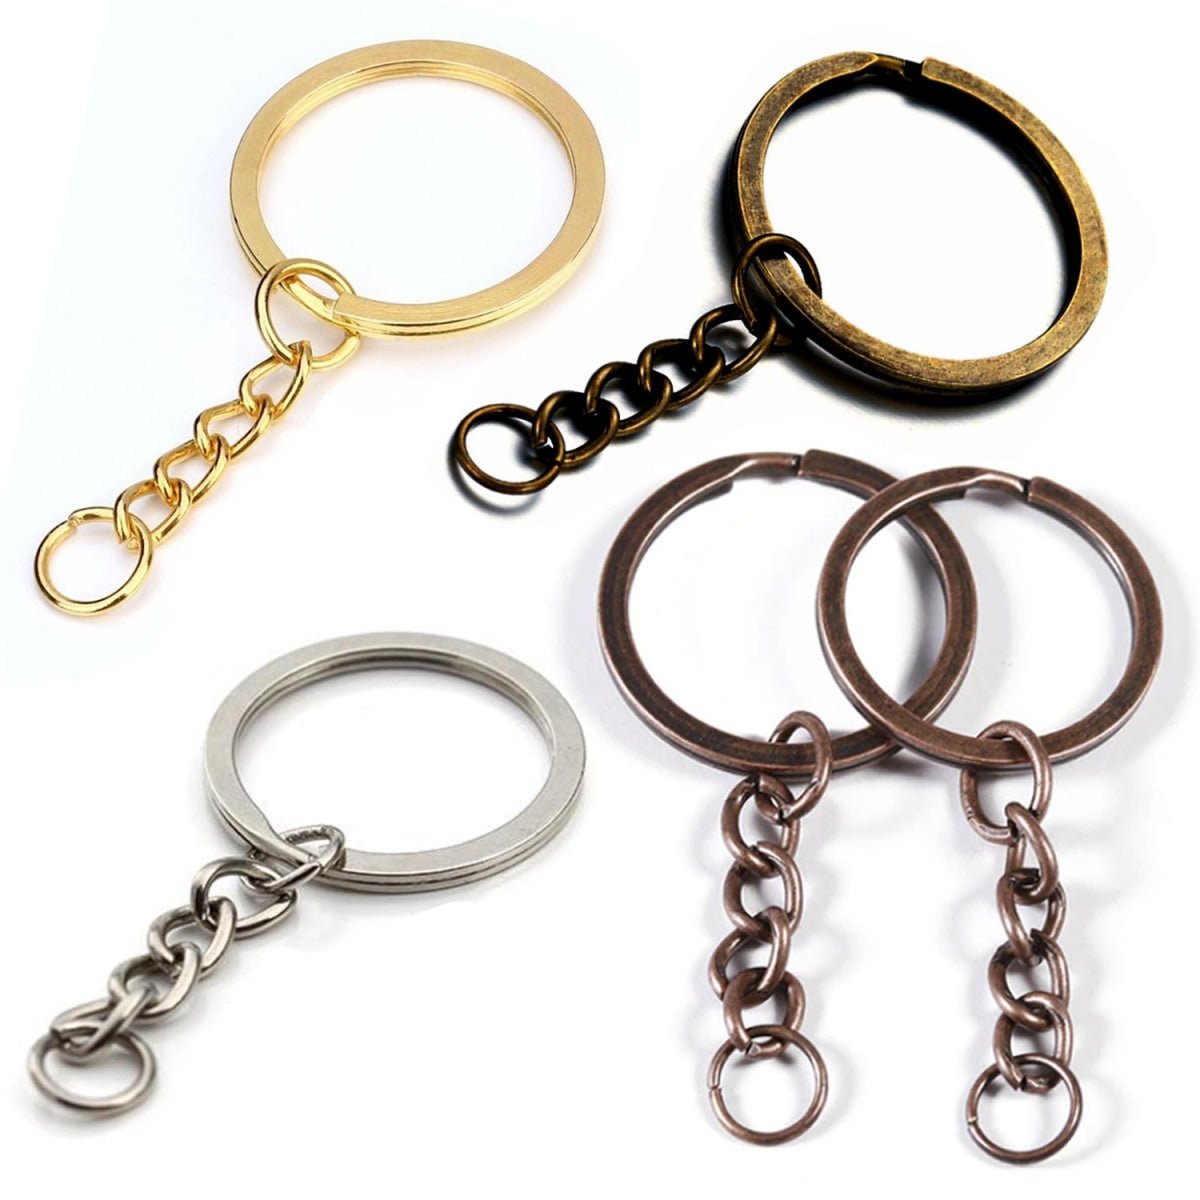 100pcs 25mm Gold Ancient Keyring Keychain Split Ring Chain Key Rings Key Chains - Antique Bronze - - Asia Sell